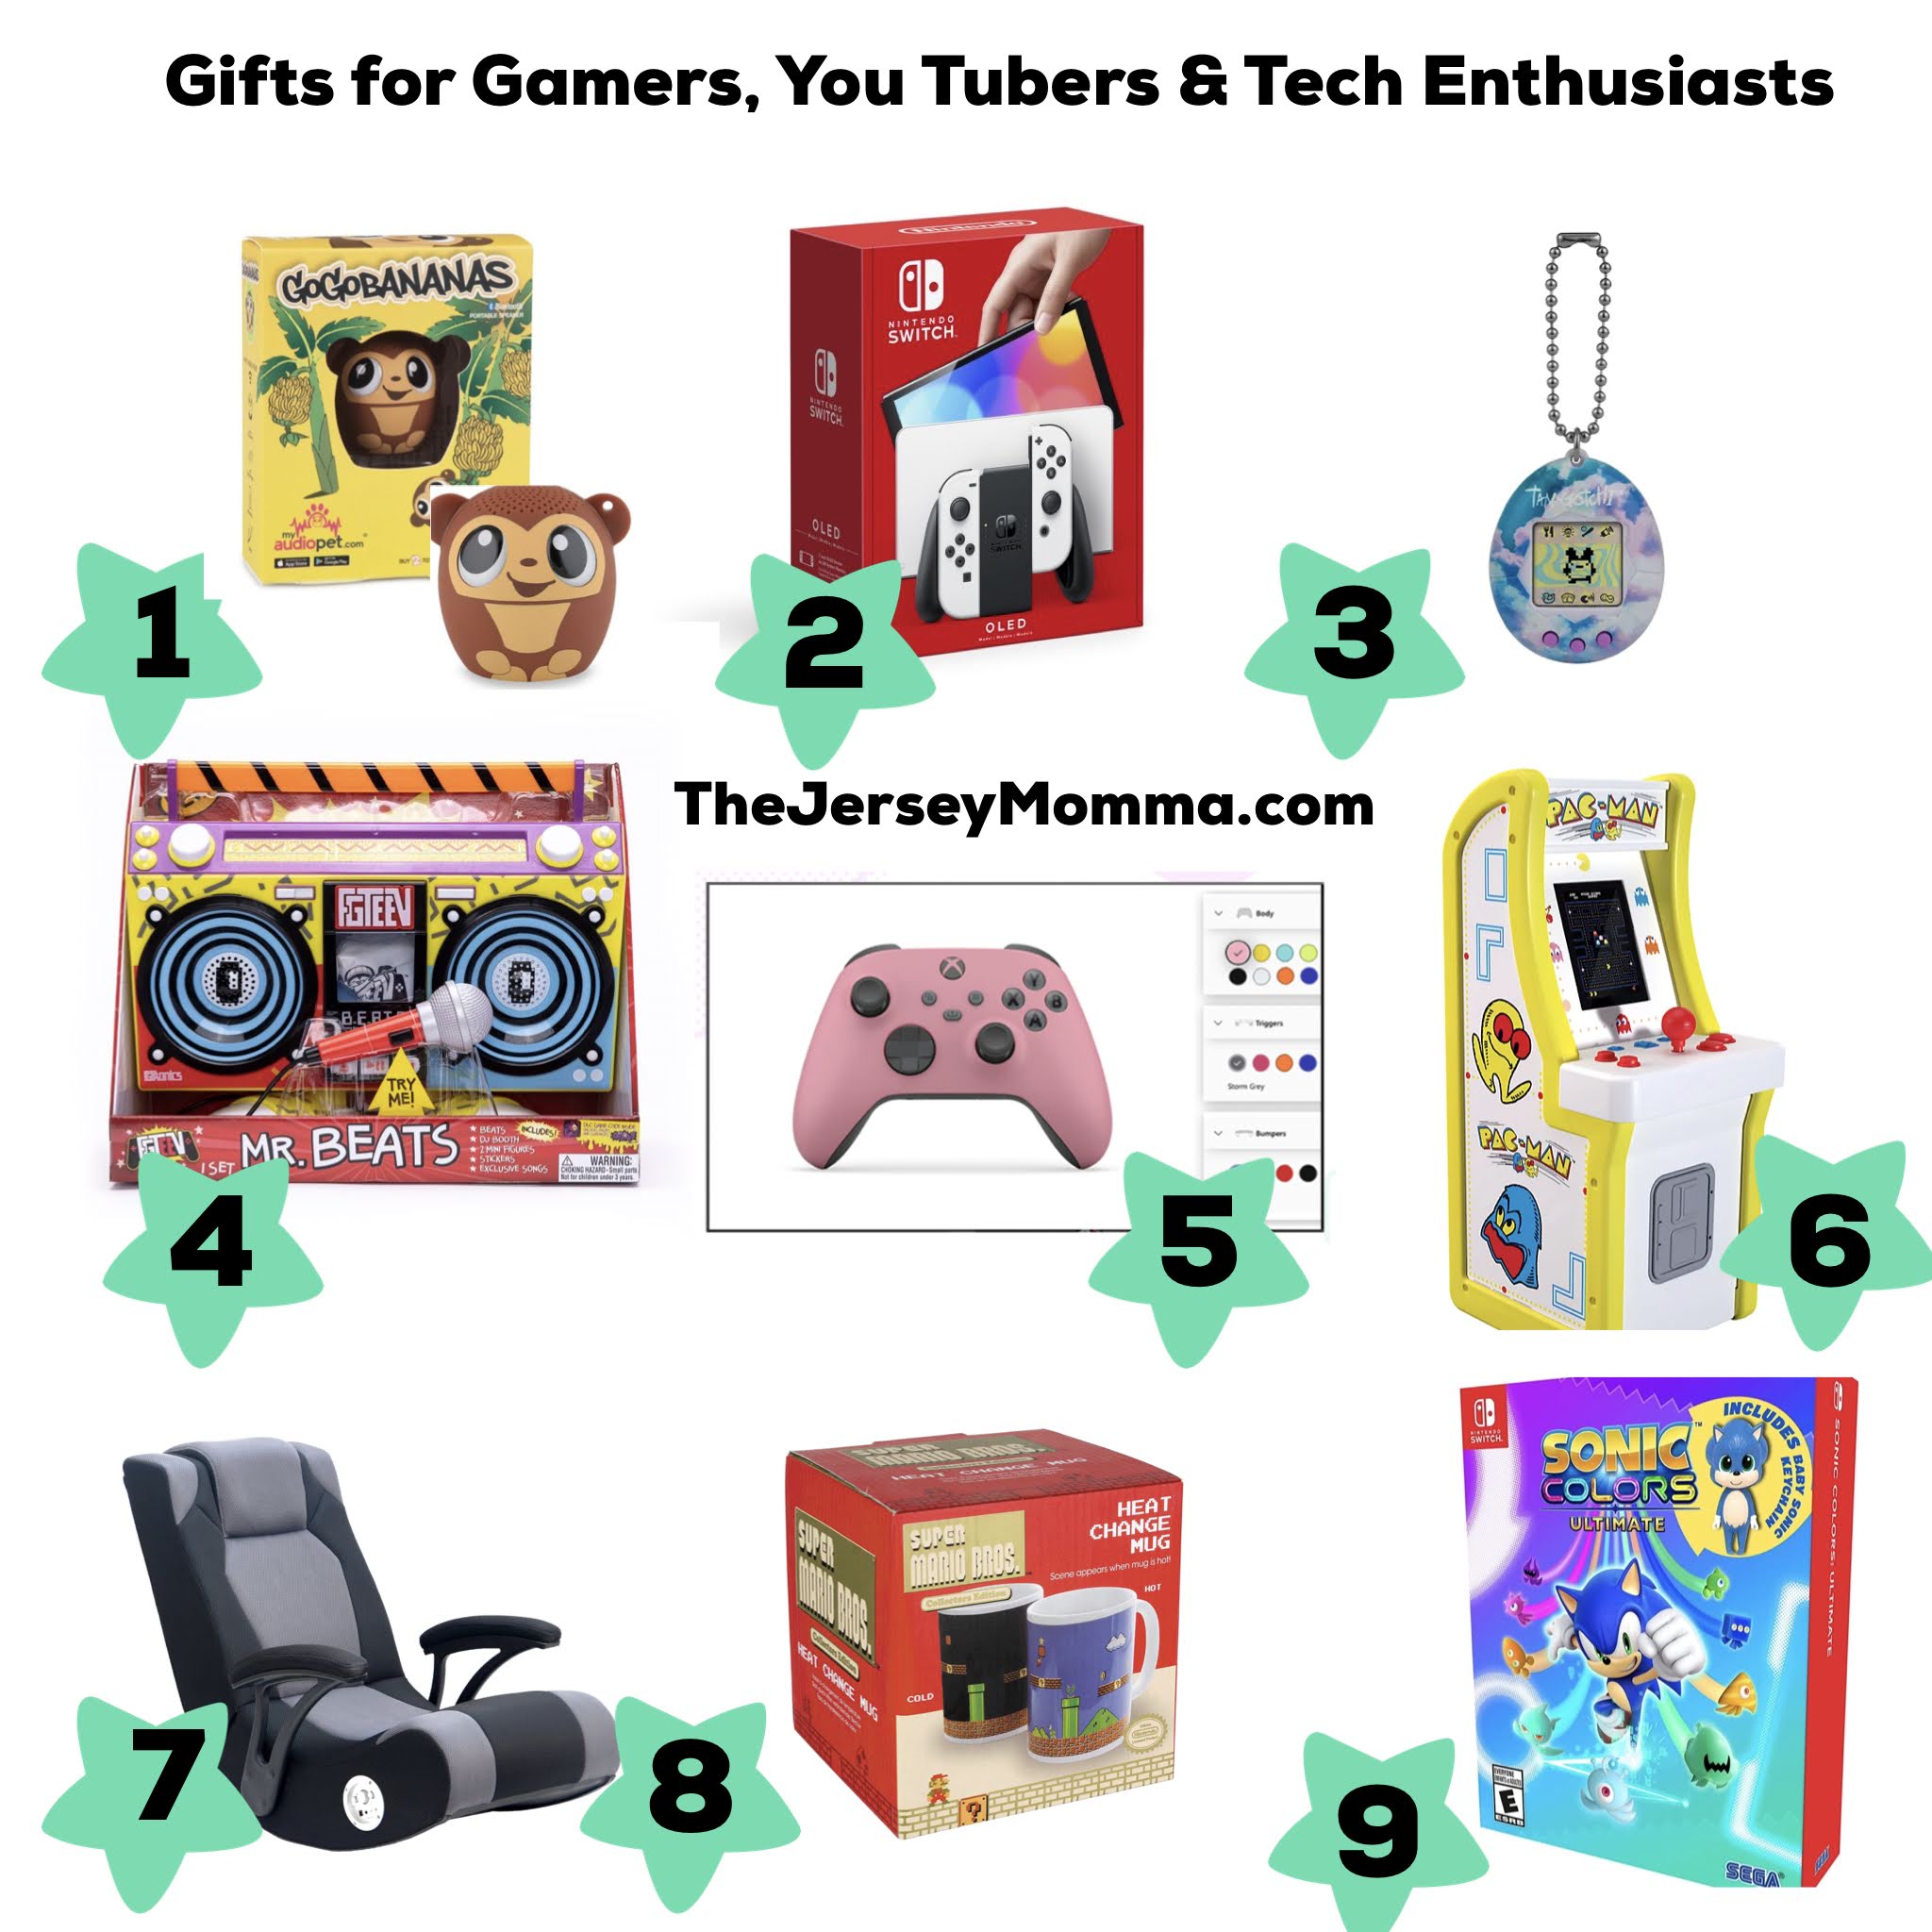 5 Gift Ideas for Kids who Love Video Games 2022 » GameTruck News